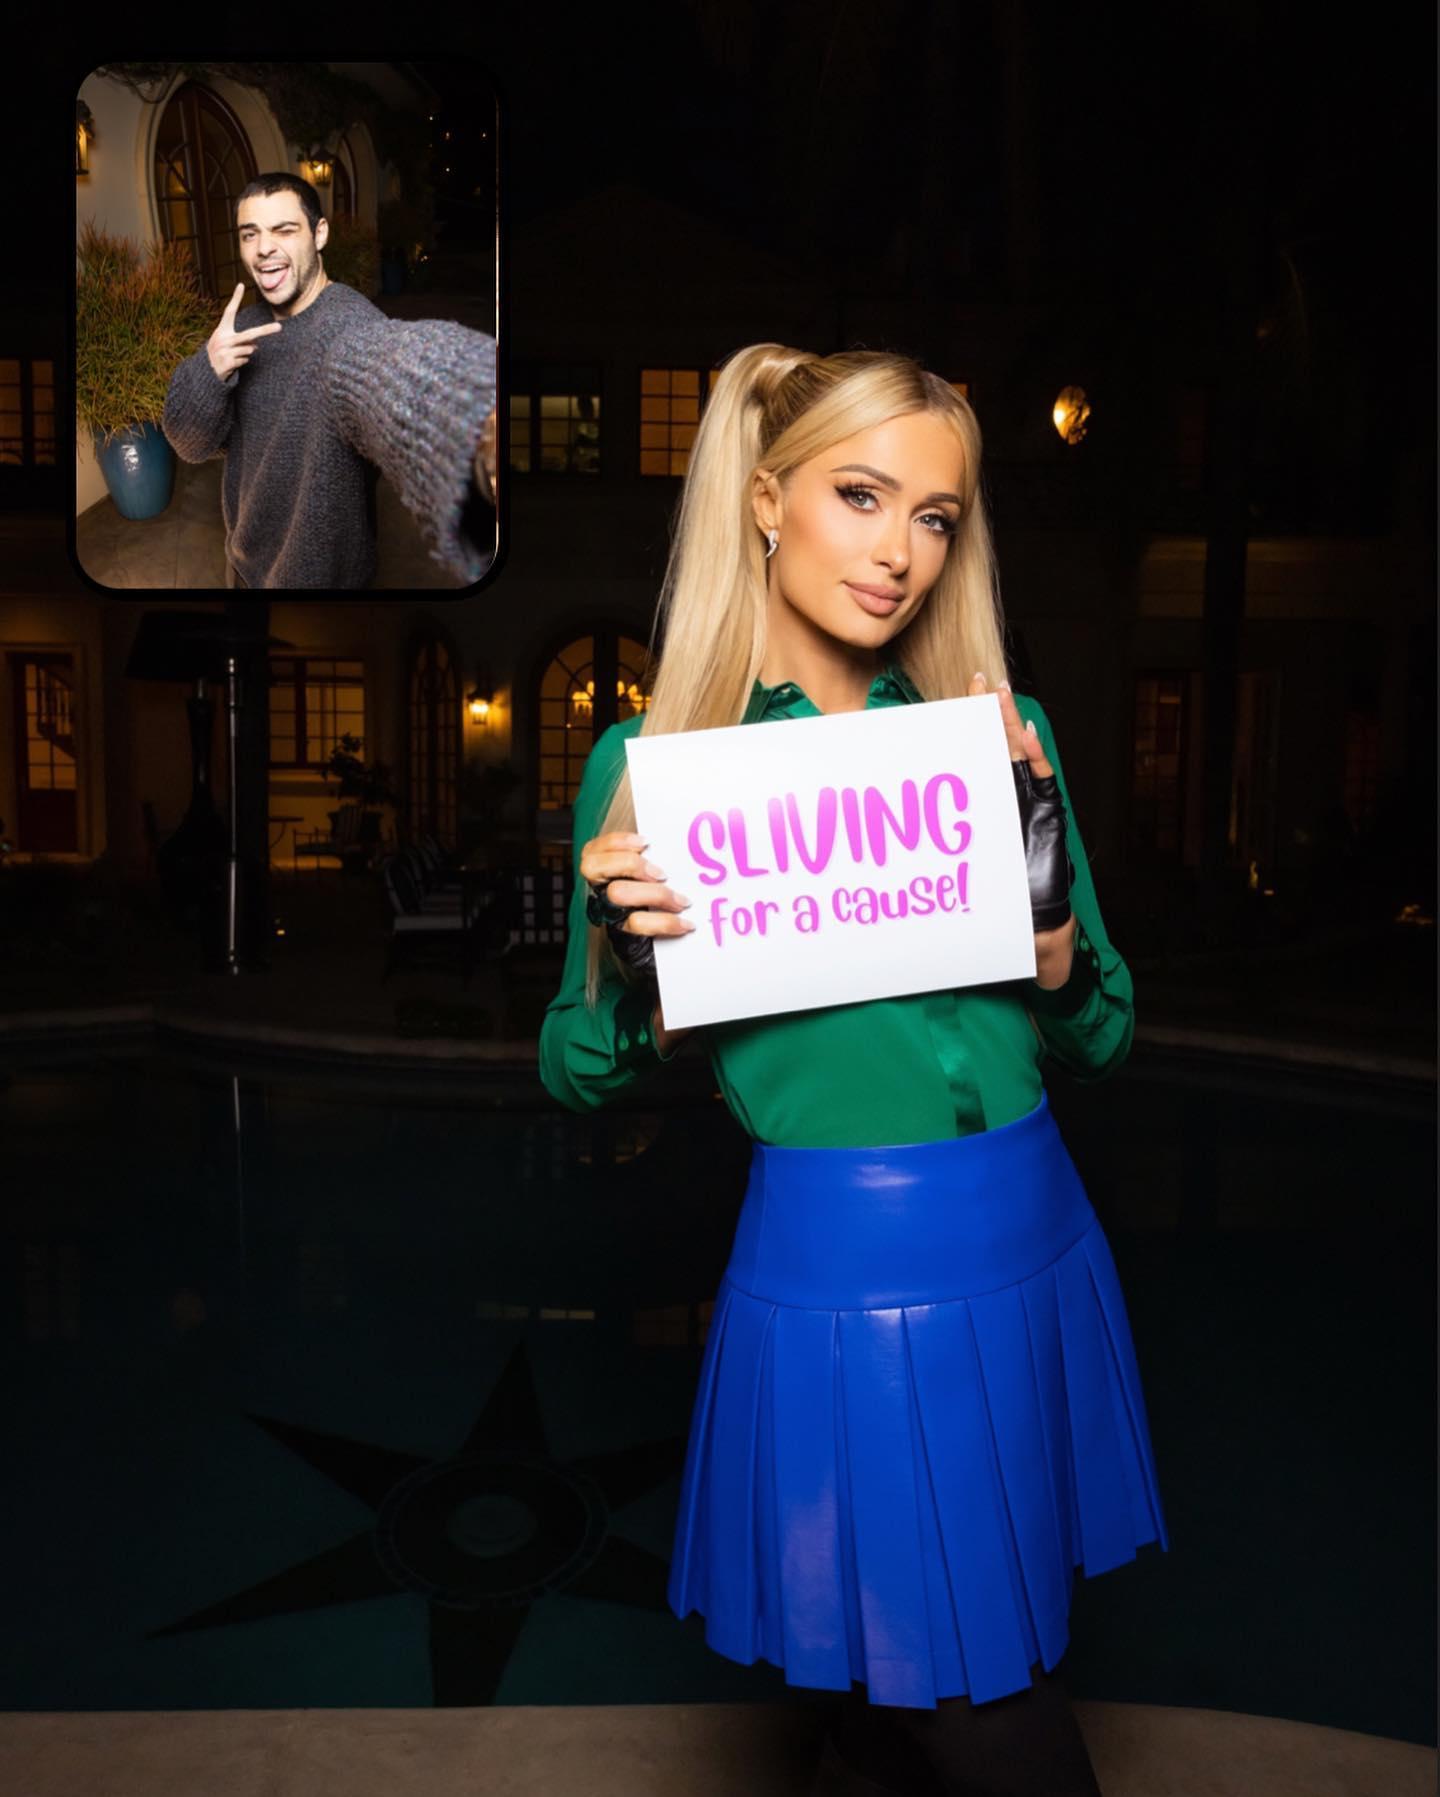 Paris Hilton and Noah Centineo sliving for a cause on Giving Tuesday